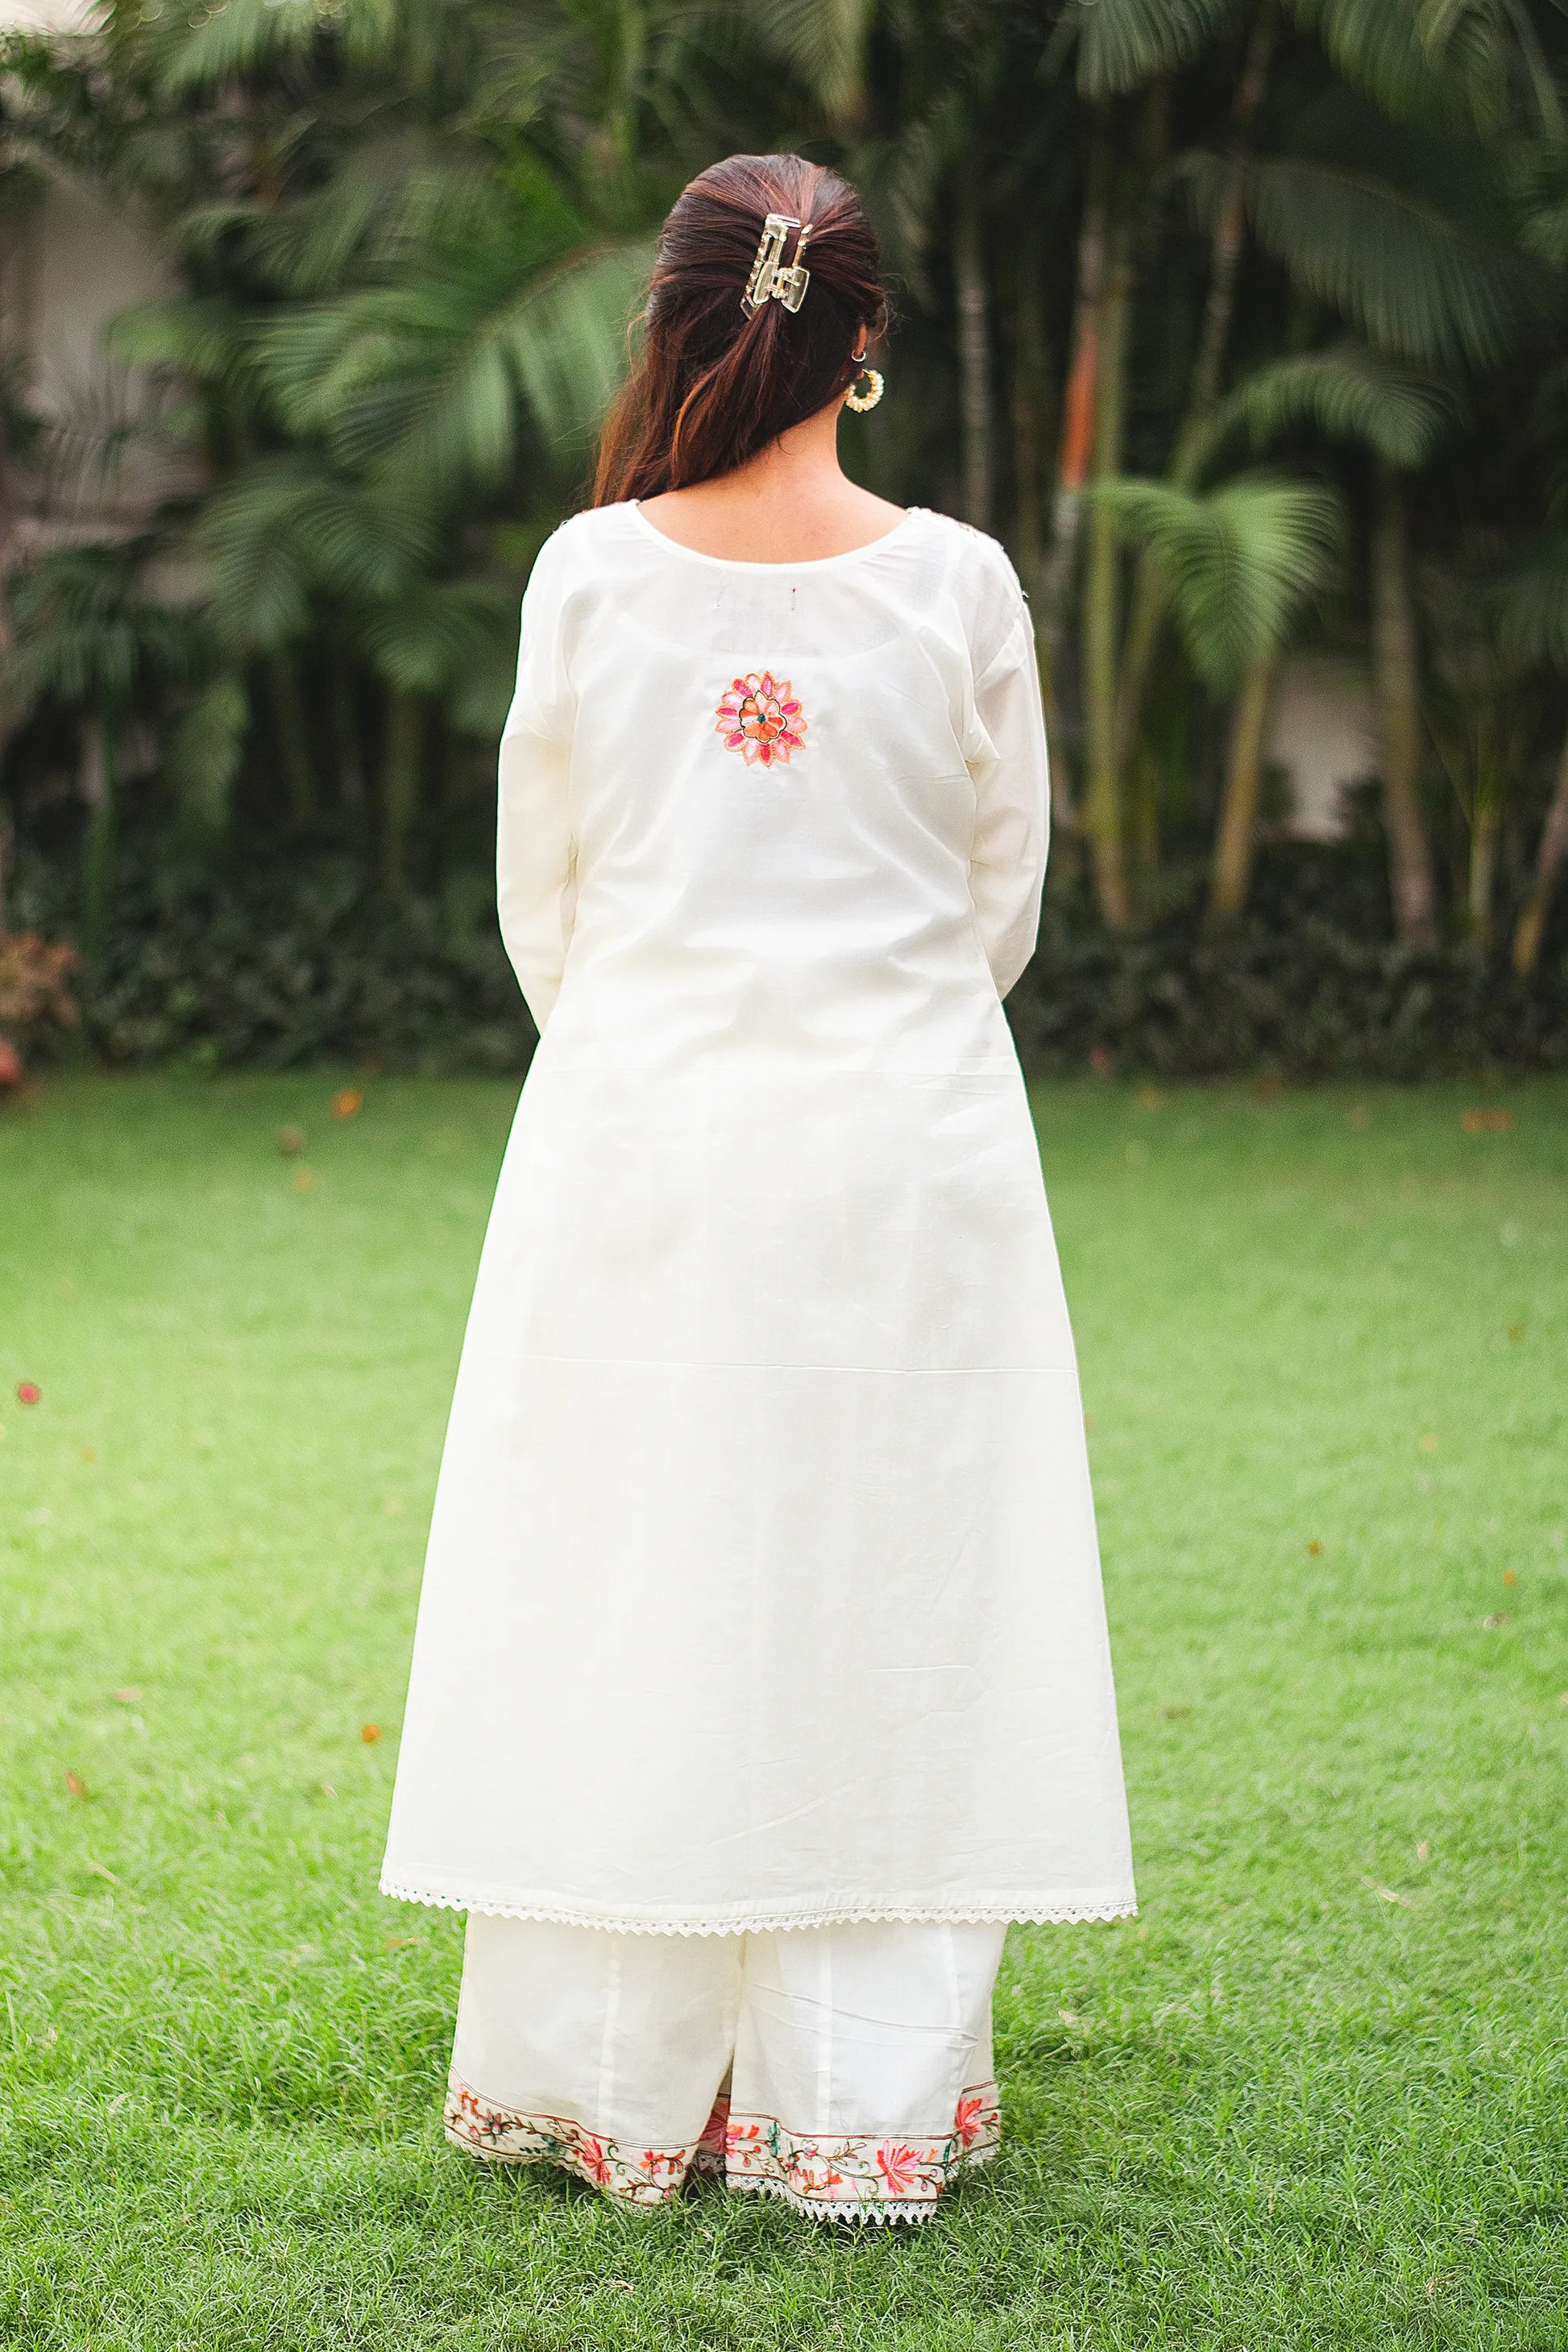 An Indian girl back pose in off-white colored Angarkha top